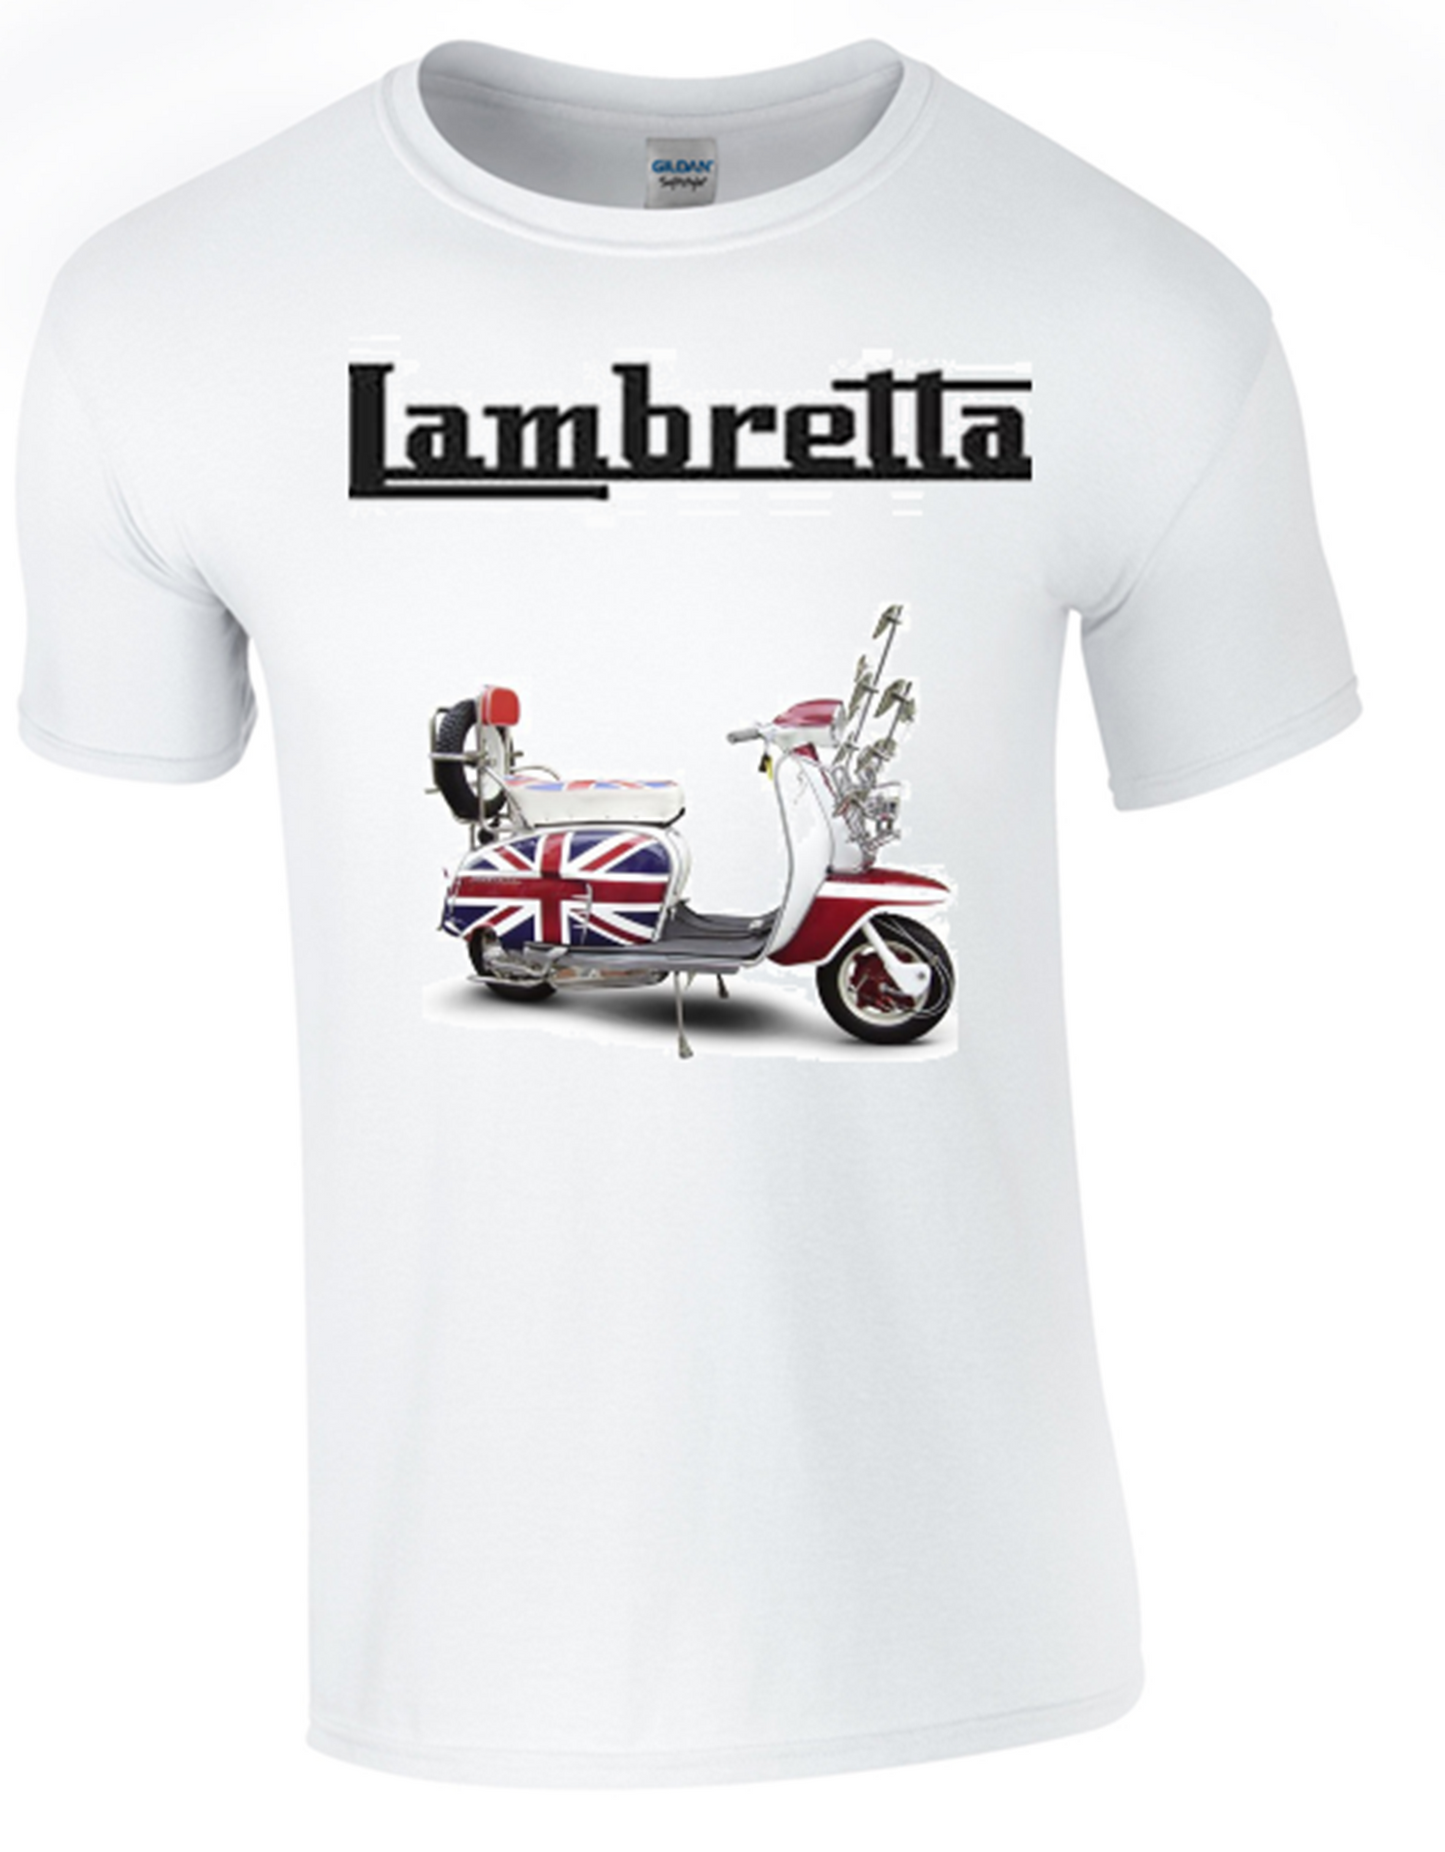 Lambretta Scooter or Target T-Shirt from S to 5XL